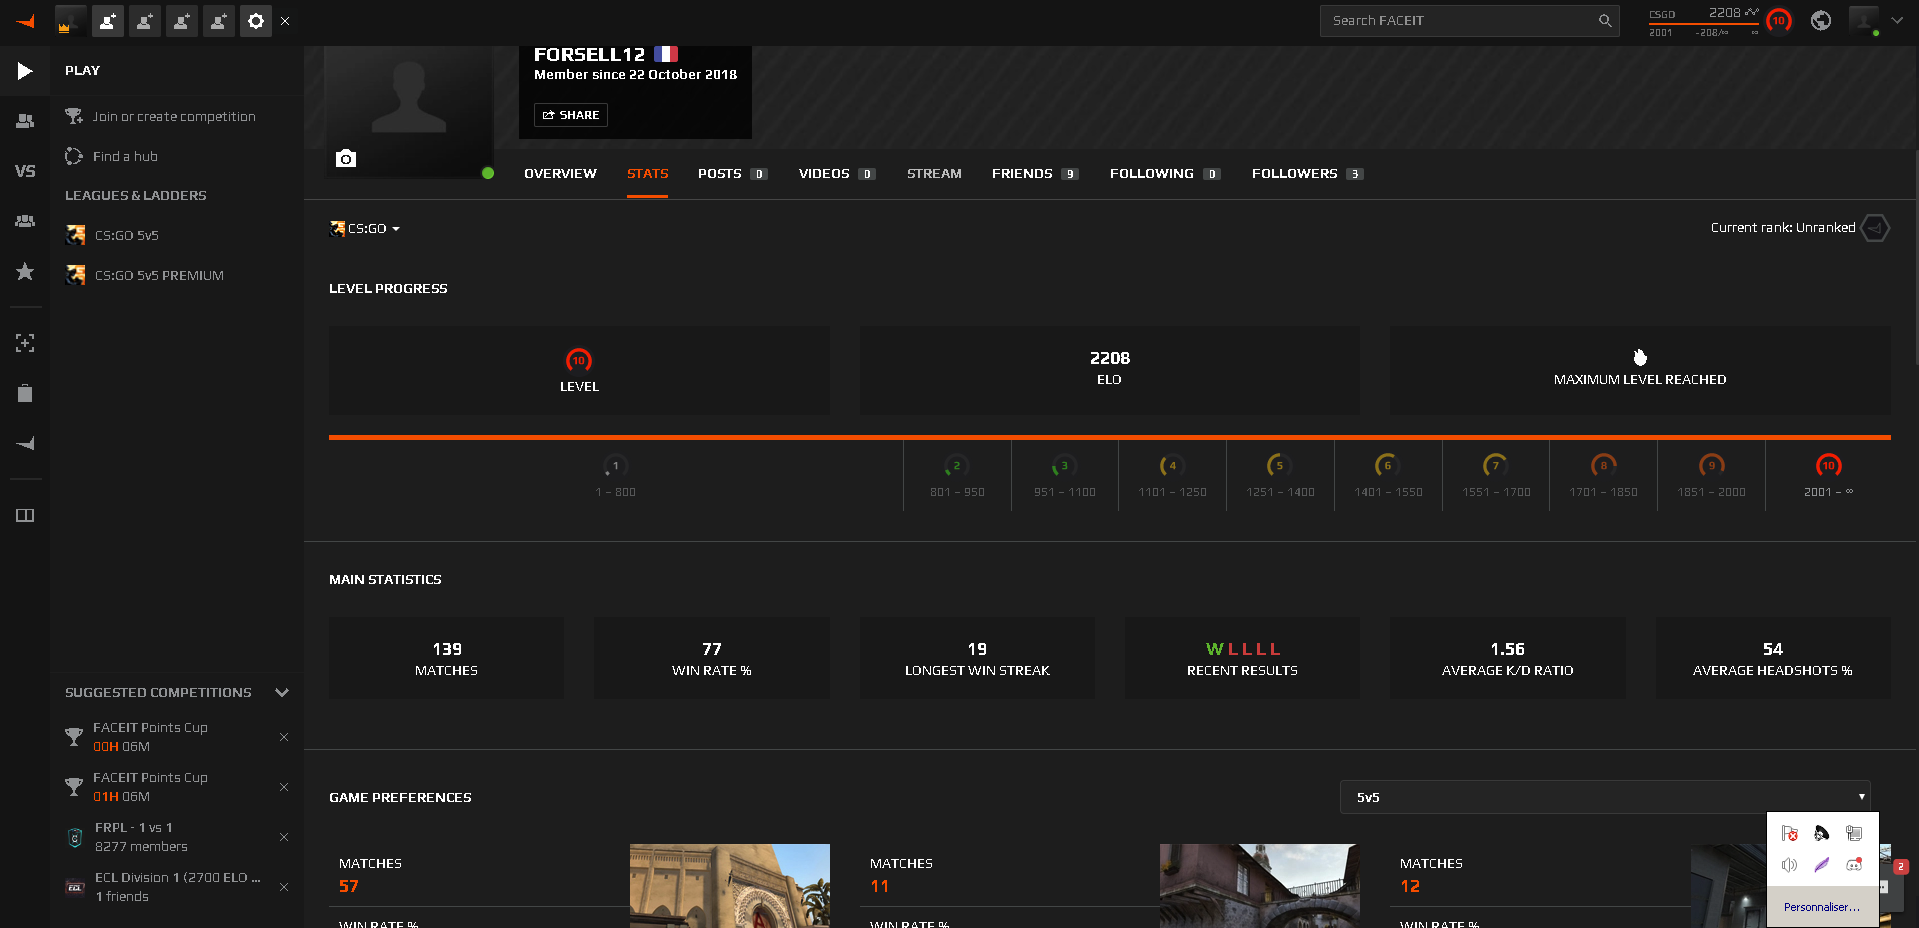 Account Faceit Level 8 (1,720 Elo, 1.5 K/D, 60% Winrate)